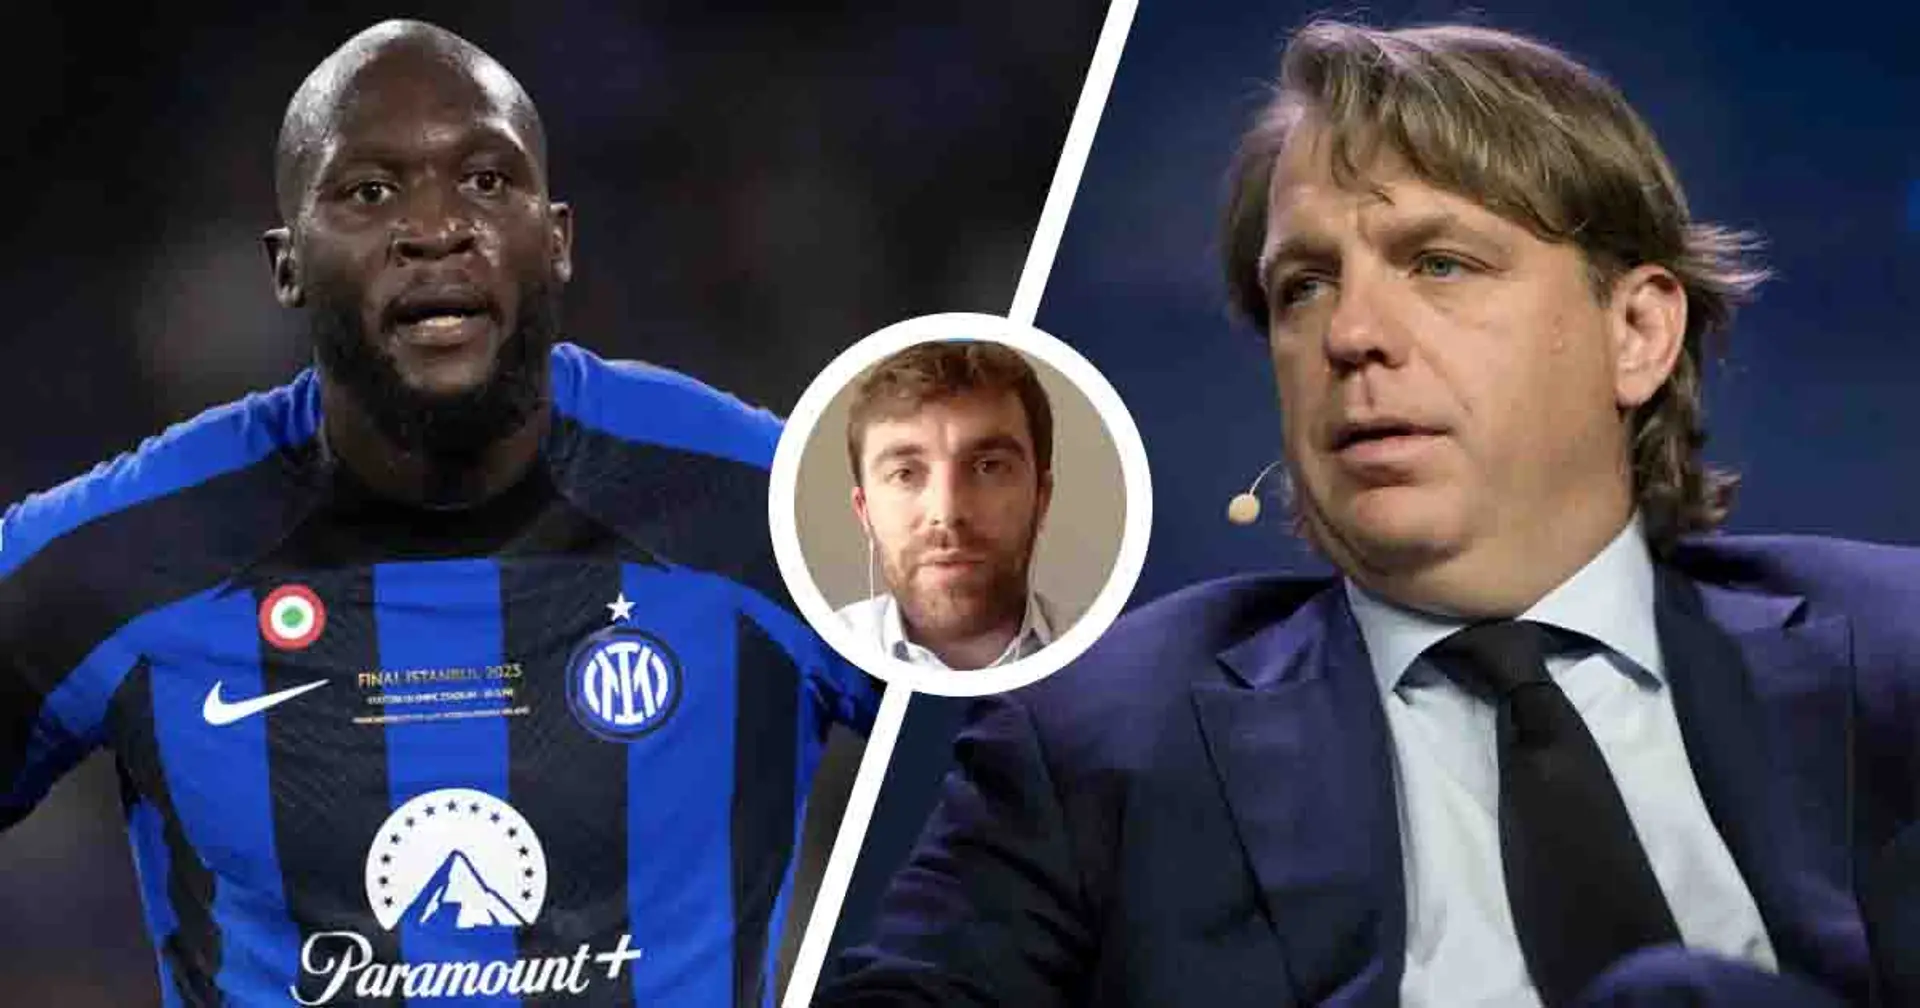 Fabrizio Romano names four more Chelsea players who could leave in summer - one is Lukaku